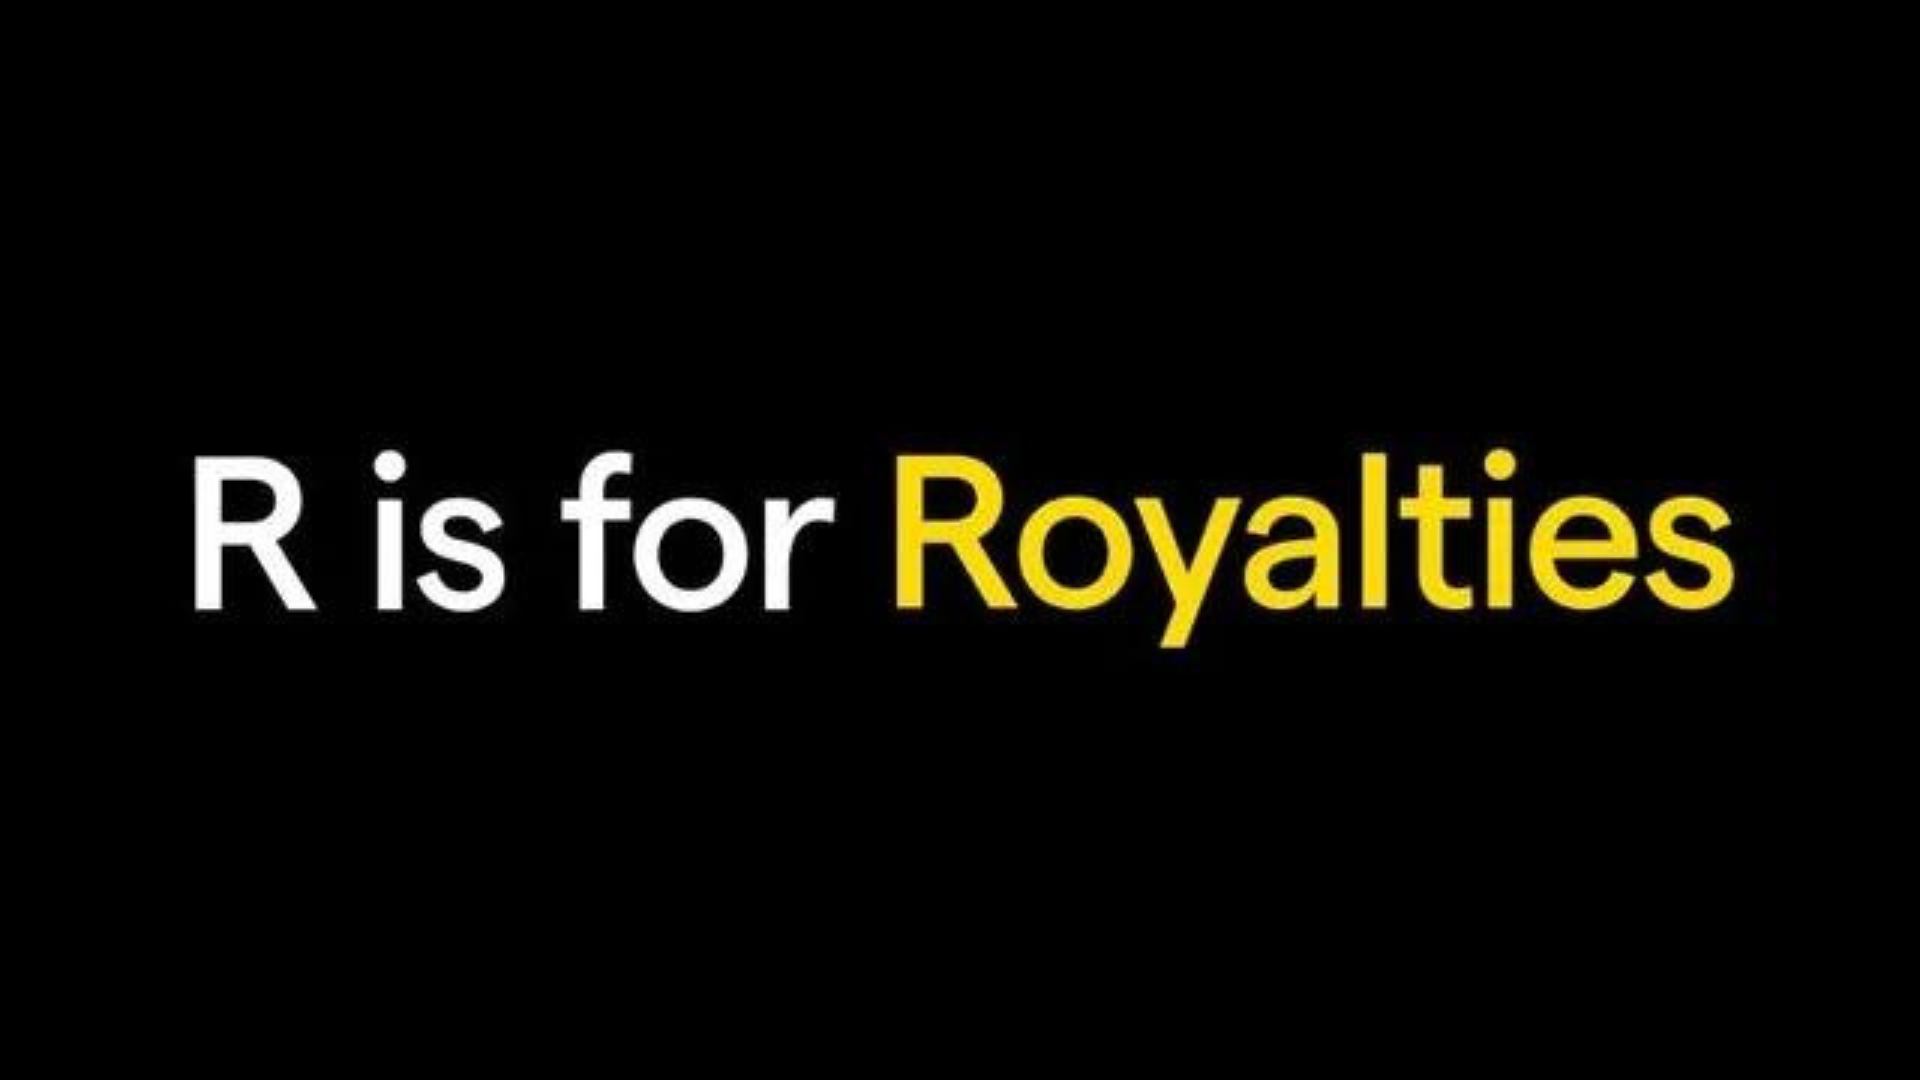 Rarible NFt Marketplace statement "R Is For Royalties" 